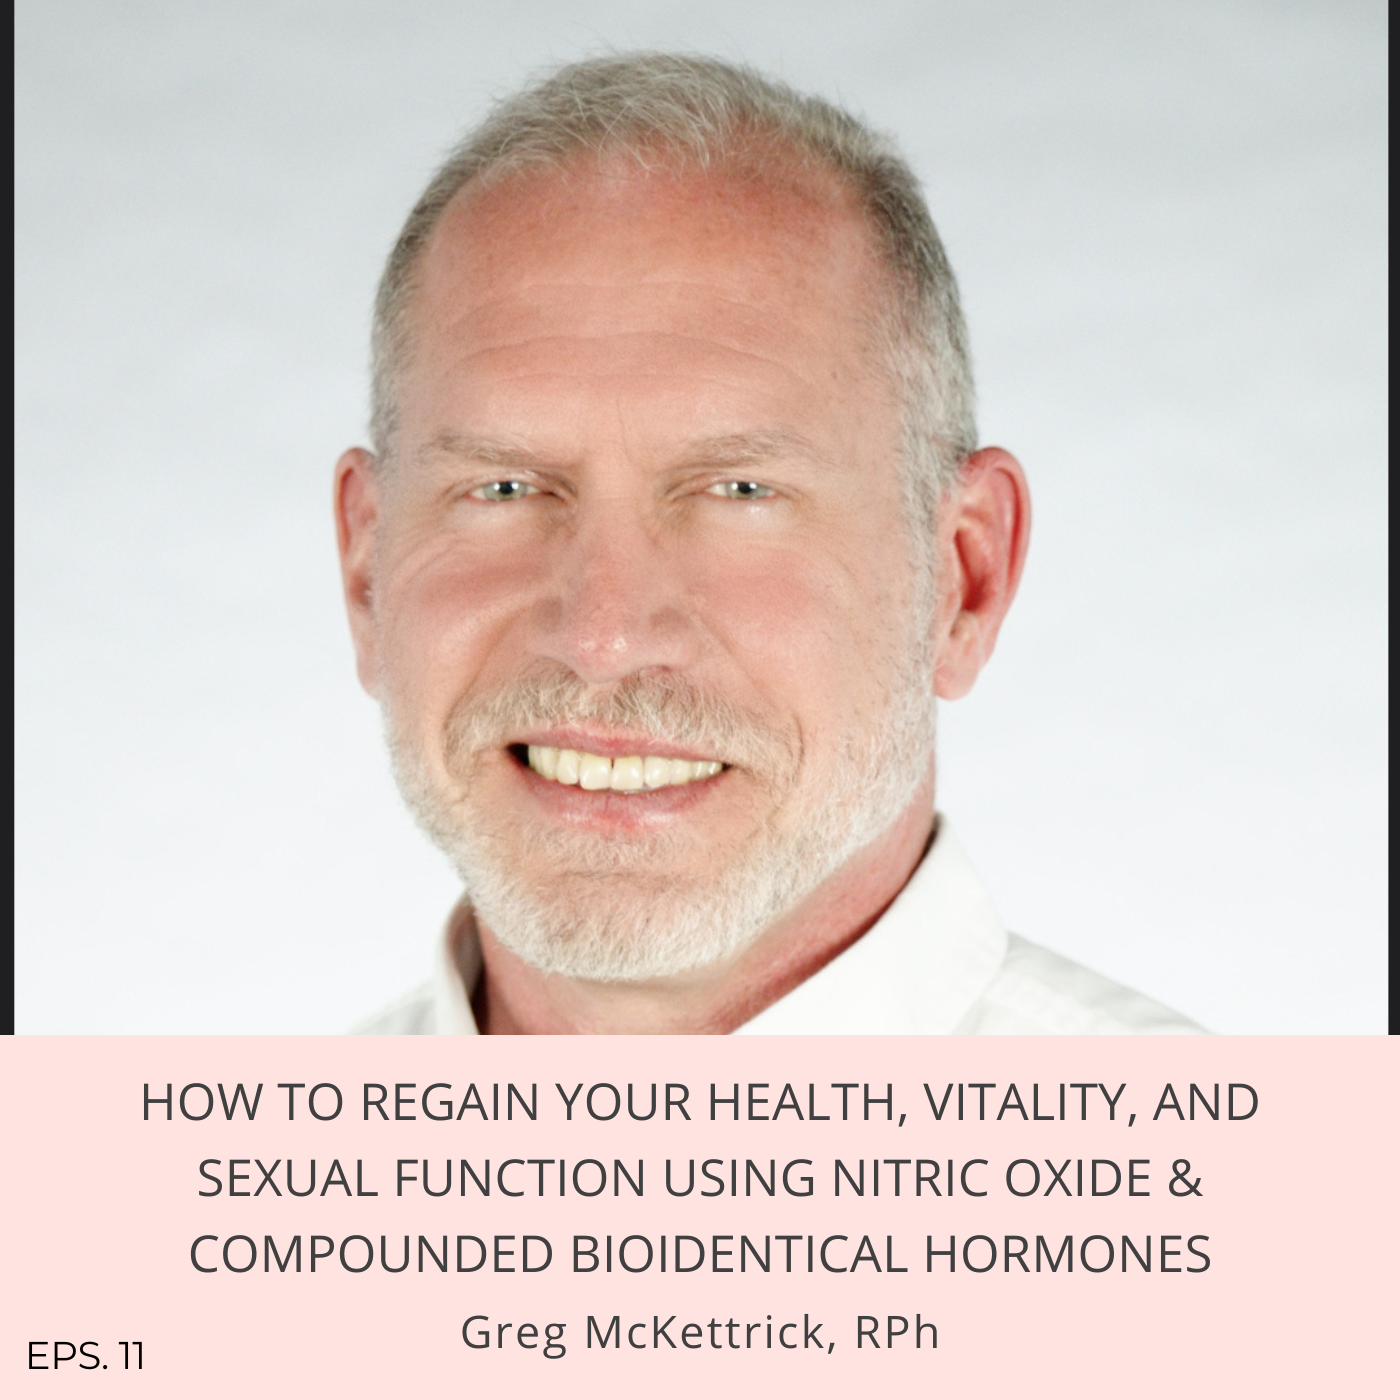 Episode 11: How to regain your health, vitality, and sexual function using nitric oxide & compounded bioidentical hormones with Greg McKettrick, RPh